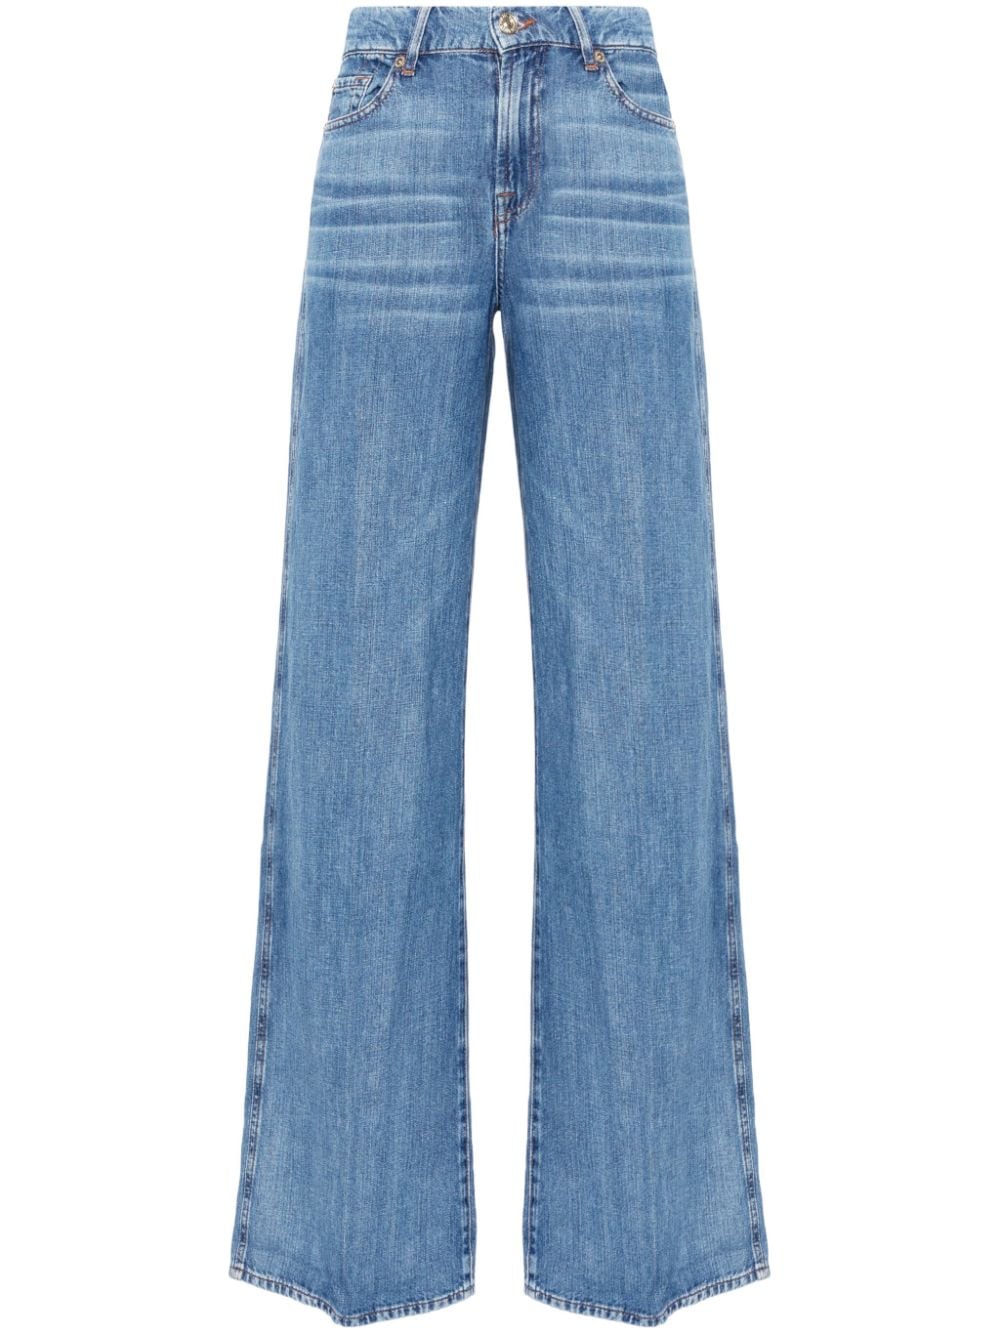 7 For All Mankind Lotta high-rise flared jeans - Blue von 7 For All Mankind